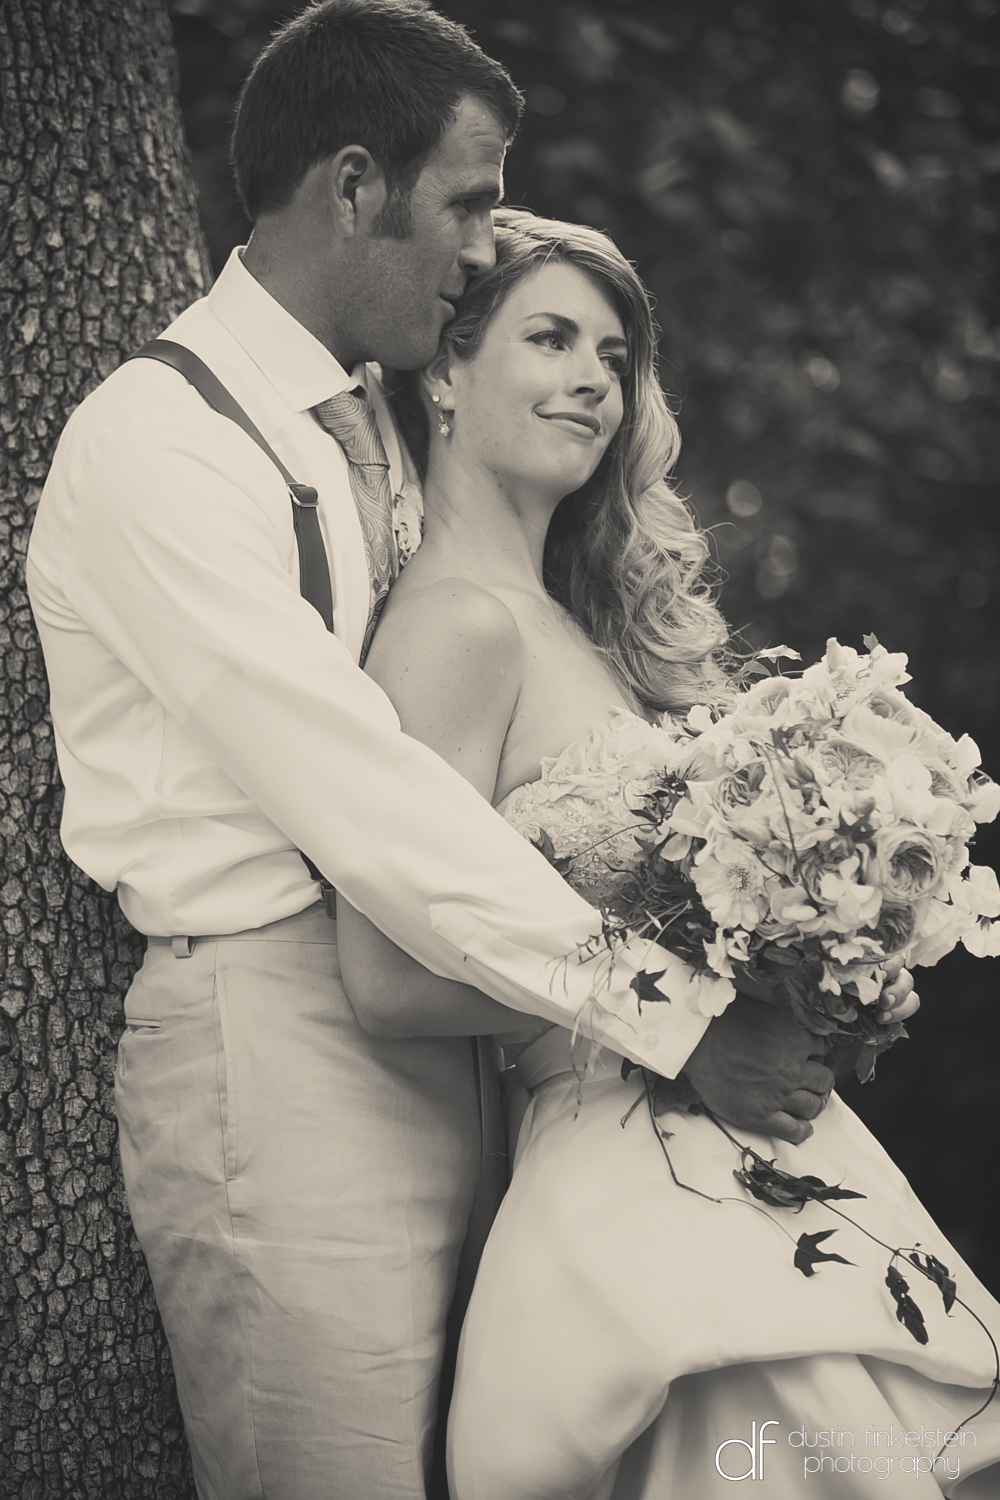 Dustin Finkelstein Photography | Wedding, Elopements, Professional and ...